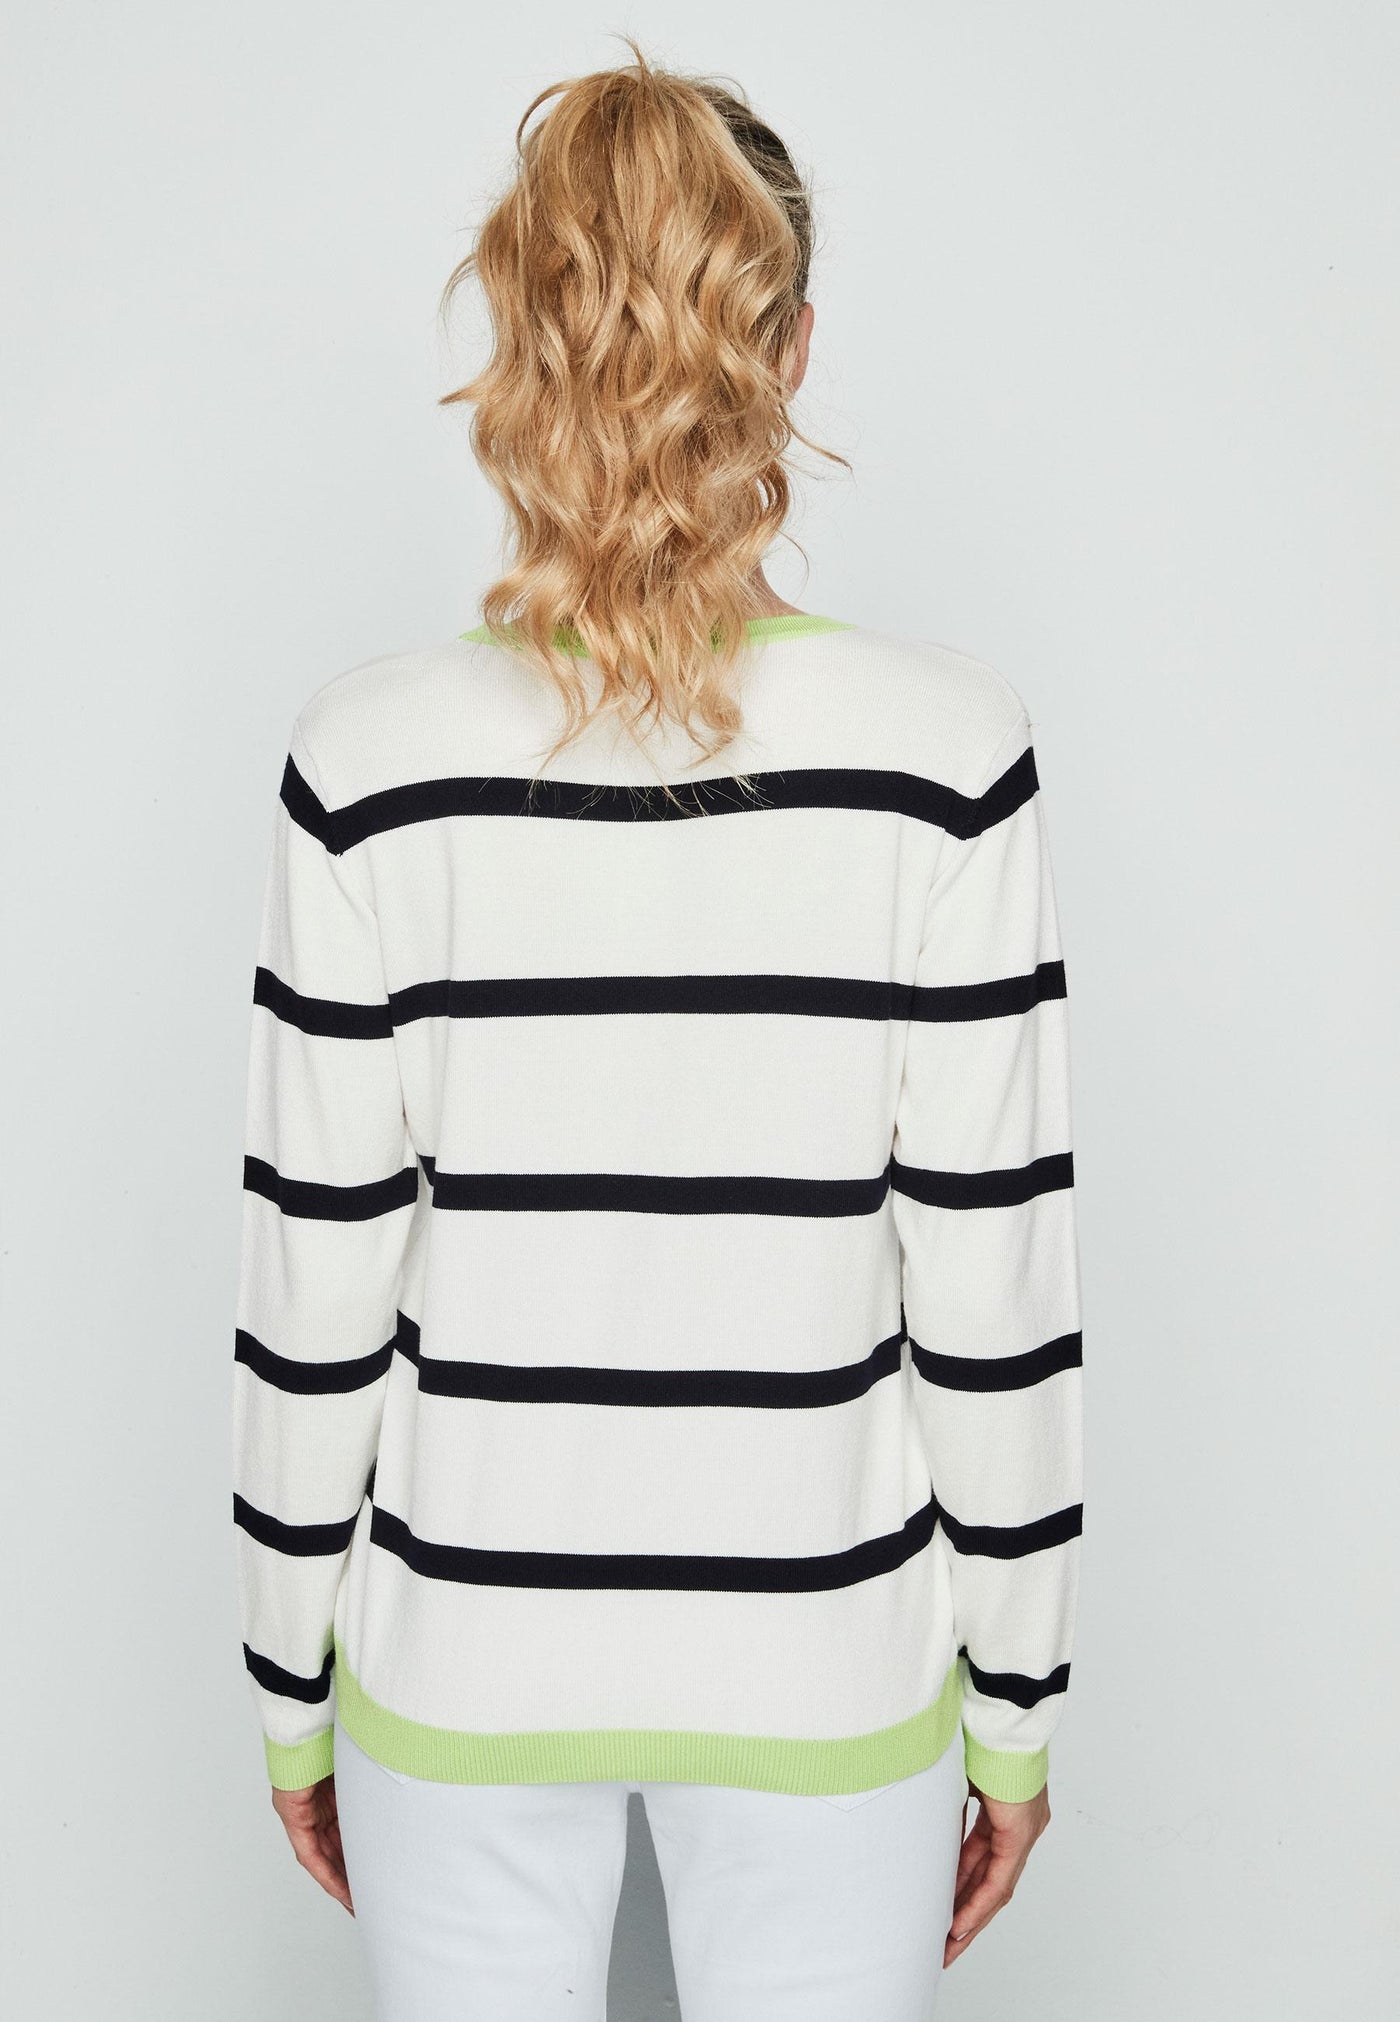 Black and White Striped Round Jumper with Lime Green Detail